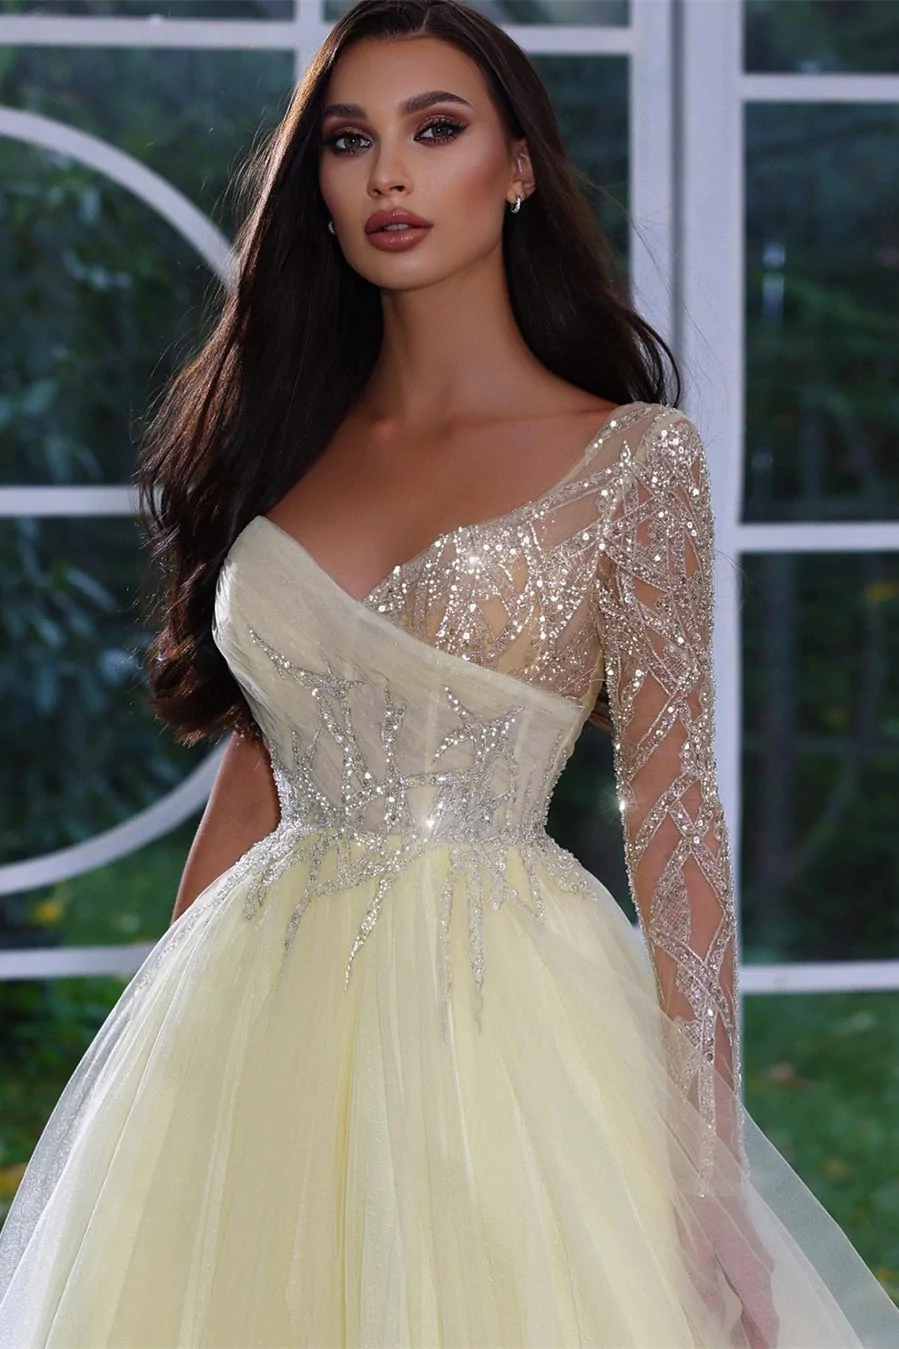 Charming A-line Long Sleeves Prom Dress With Beads Sequins nv169